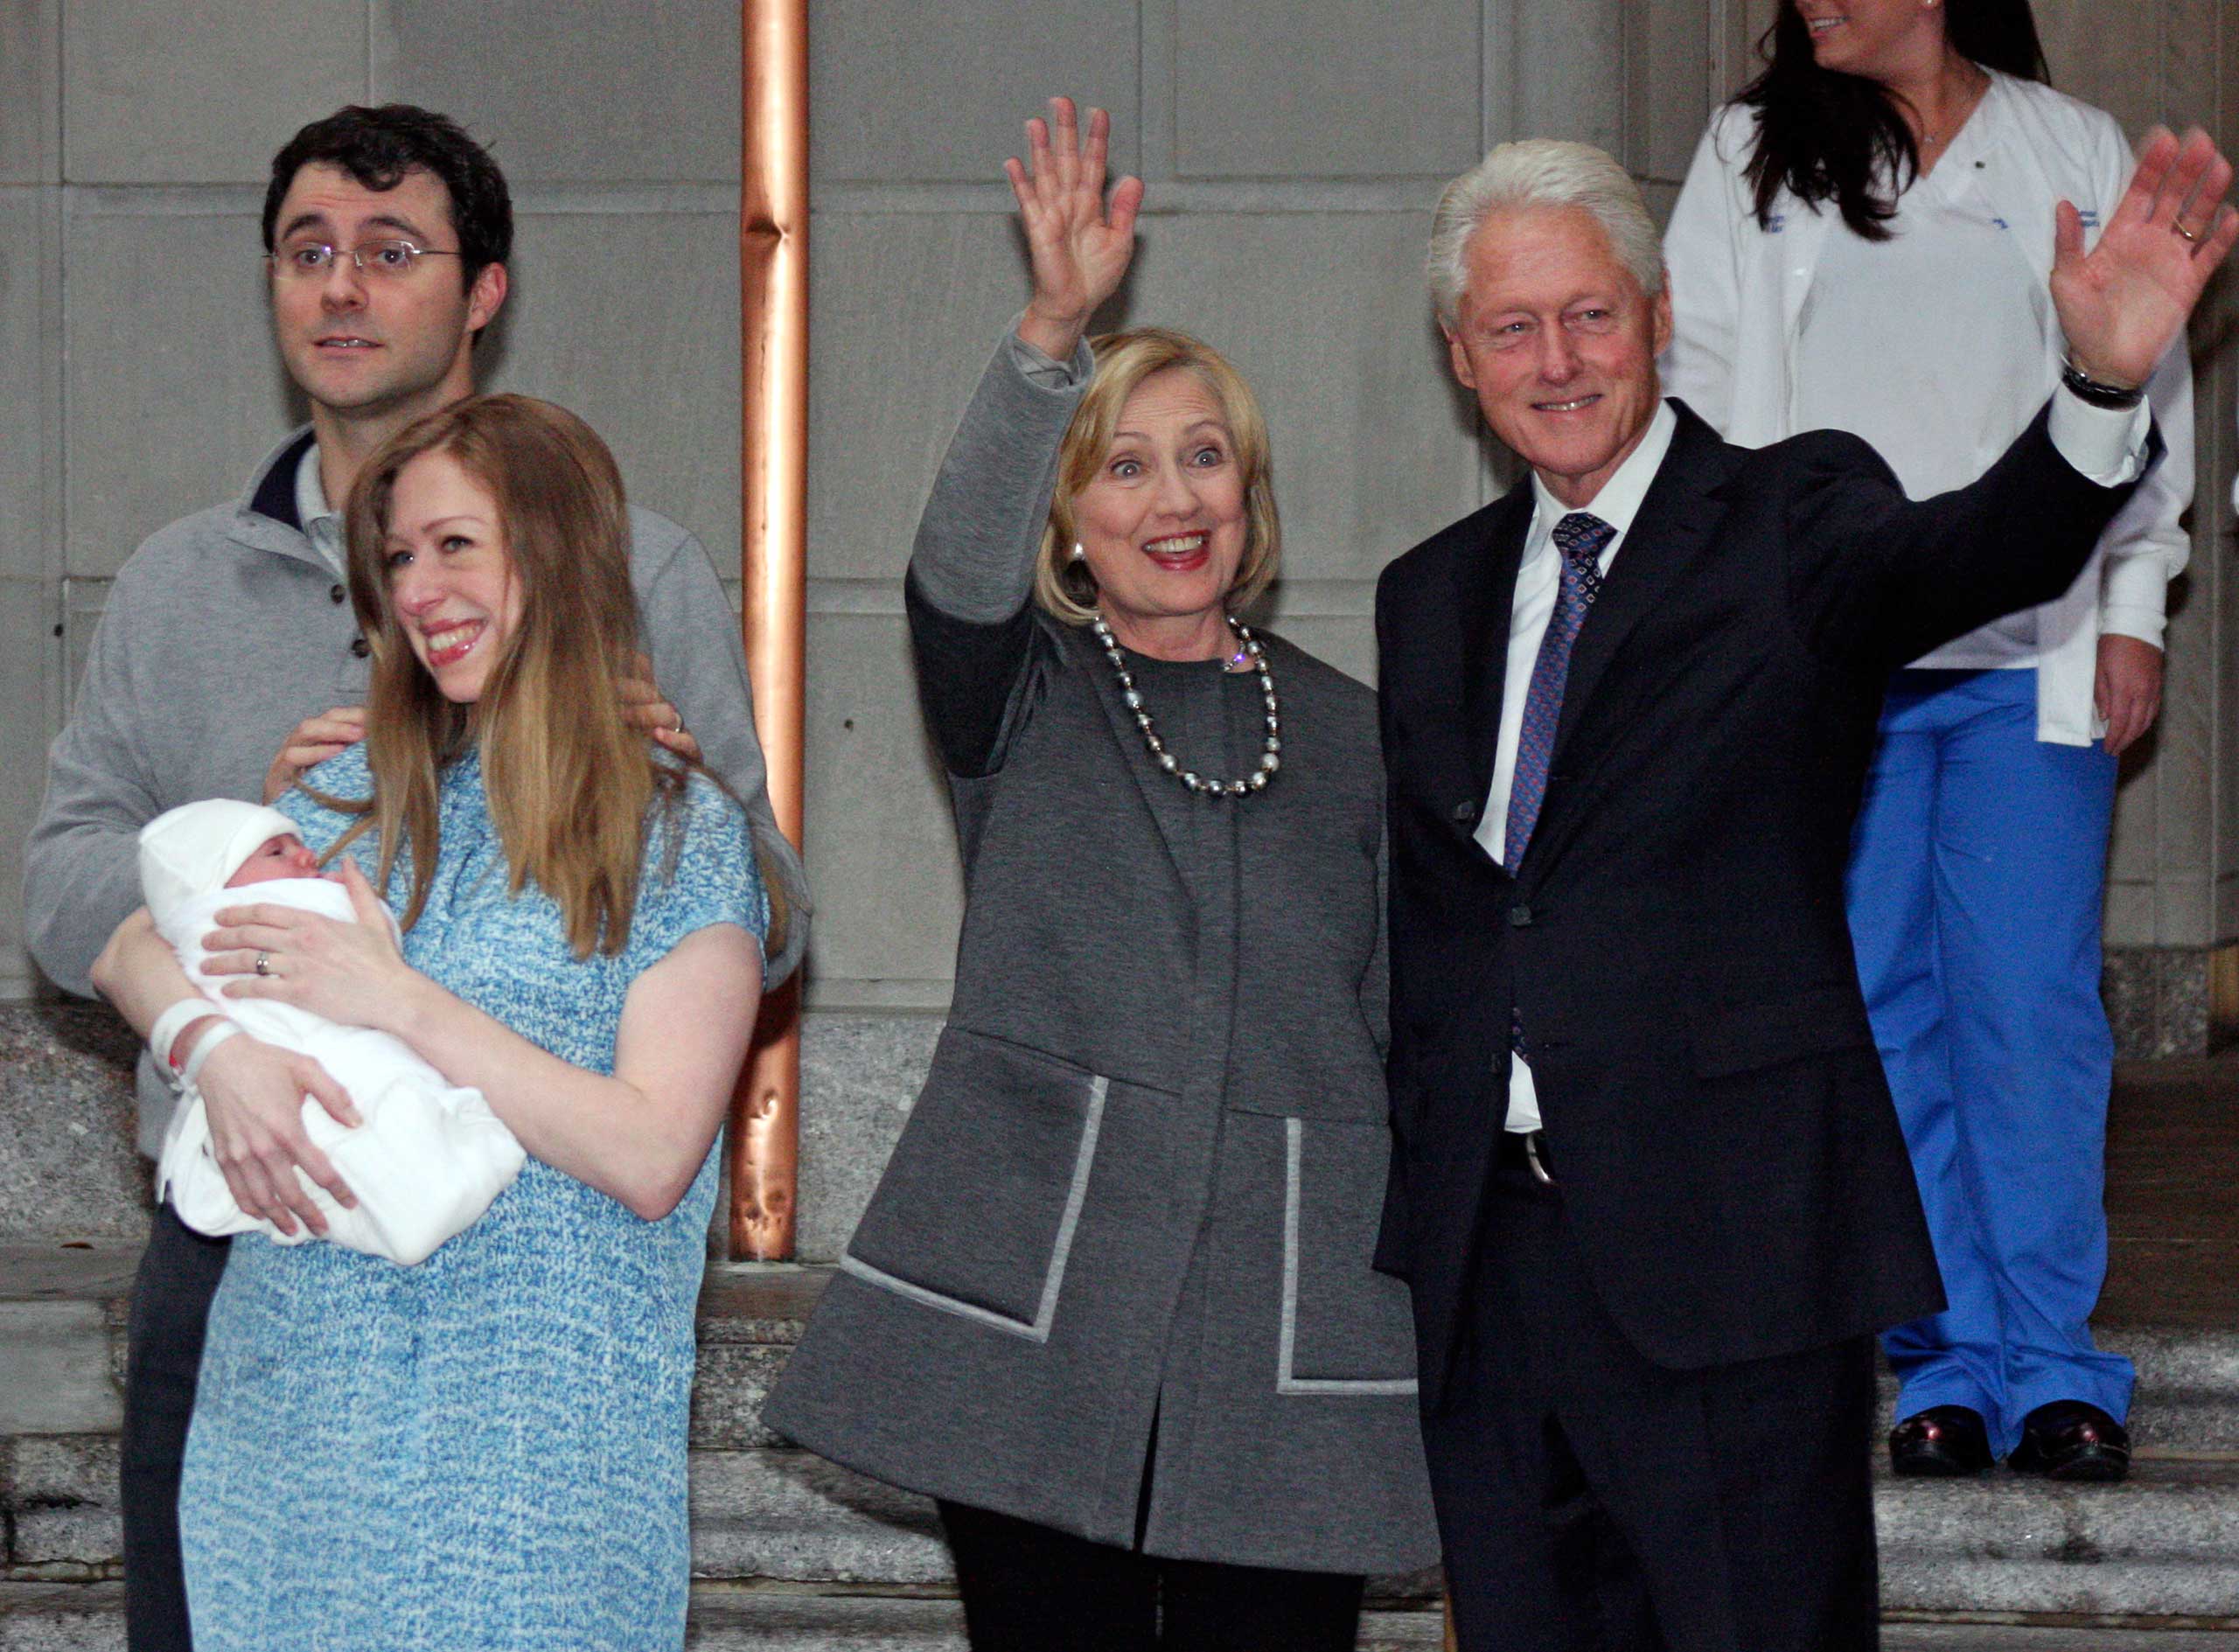 Former President Bill Clinton, right, and former Secretary of State Hillary Rodham Clinton, second from right, wave to the media as Marc Mezvinsky and Chelsea Clinton pose for photographers with their newborn baby, Charlotte, after the family leaves Manhattan's Lenox Hill hospital in New York City on Sept. 29, 2014.